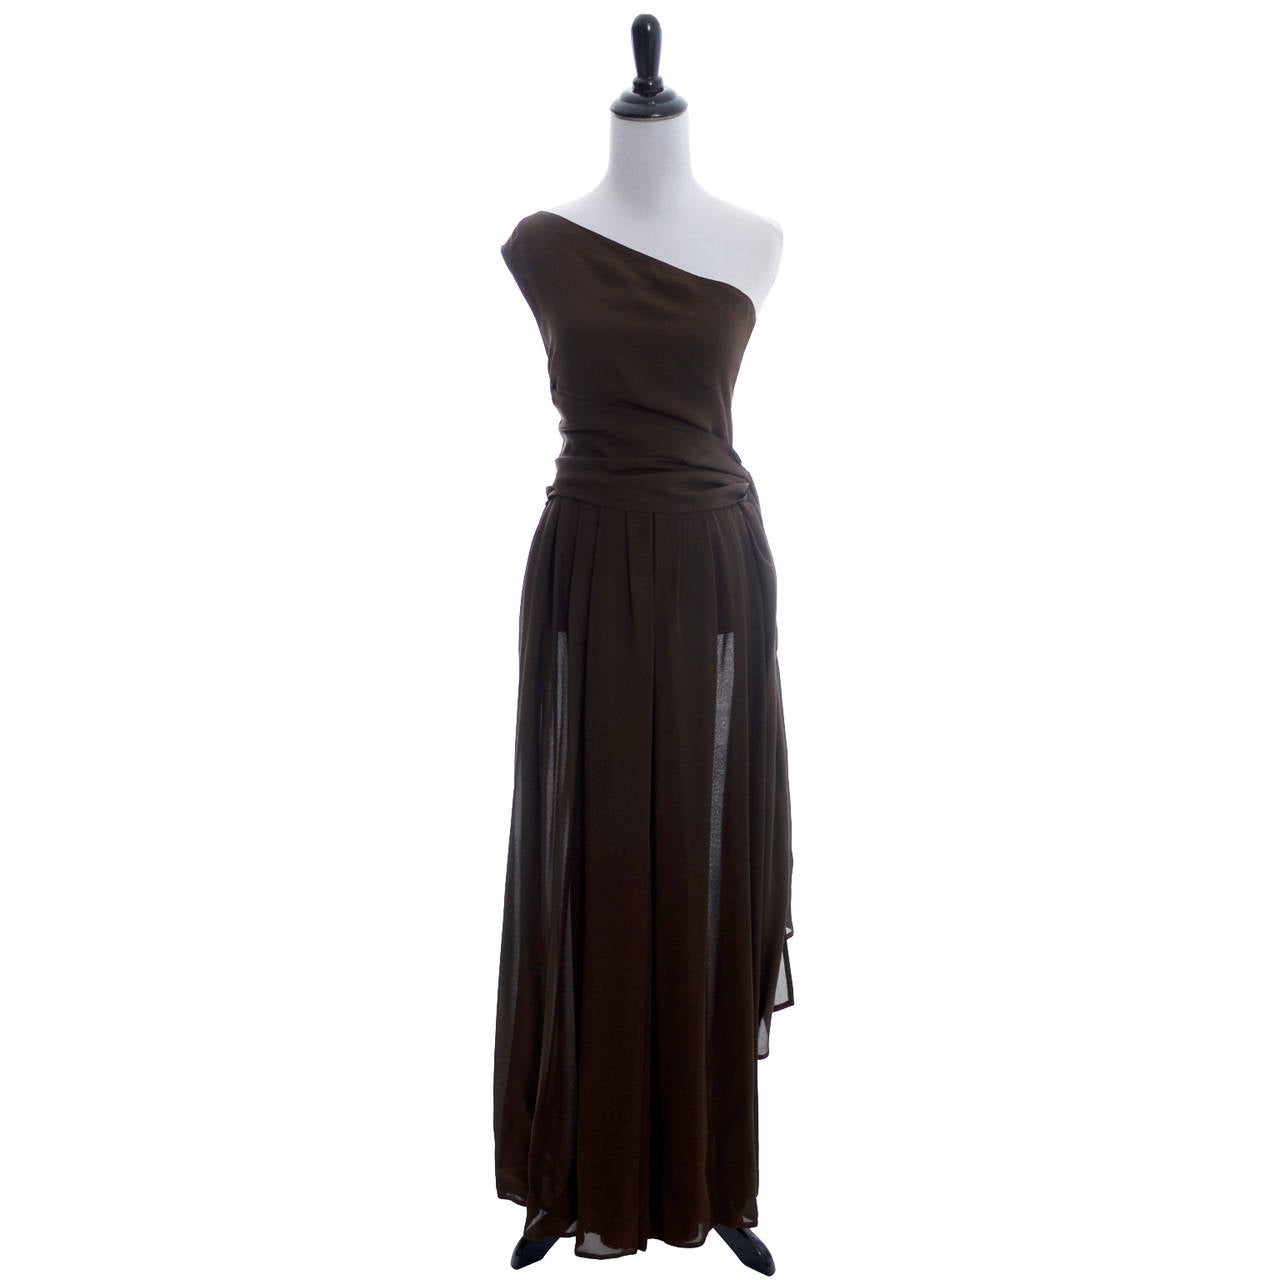 This Michael Kors 2 piece chocolate brown silk evening ensemble is phenomenal! The asymmetrical one shoulder top ties around the waistband of the palazzo pants, giving the appearance of an elegant evening gown. The pants close with side snaps and